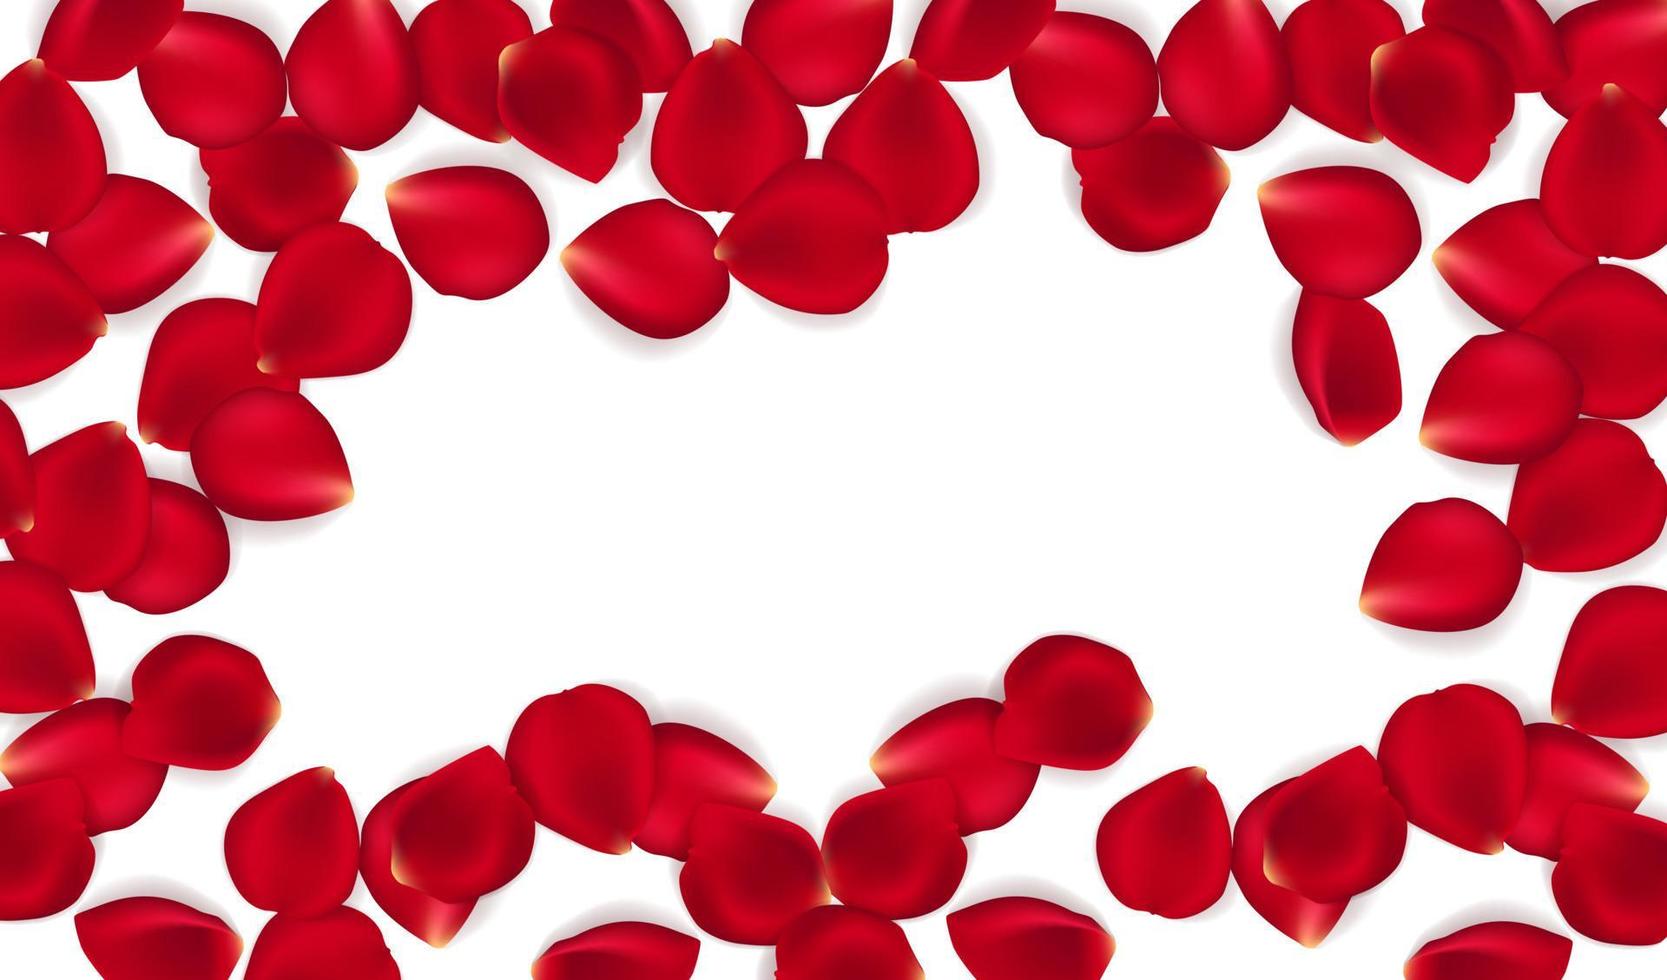 Red rose petals against white background. Eps 10 vector. Vector red rose petals background.